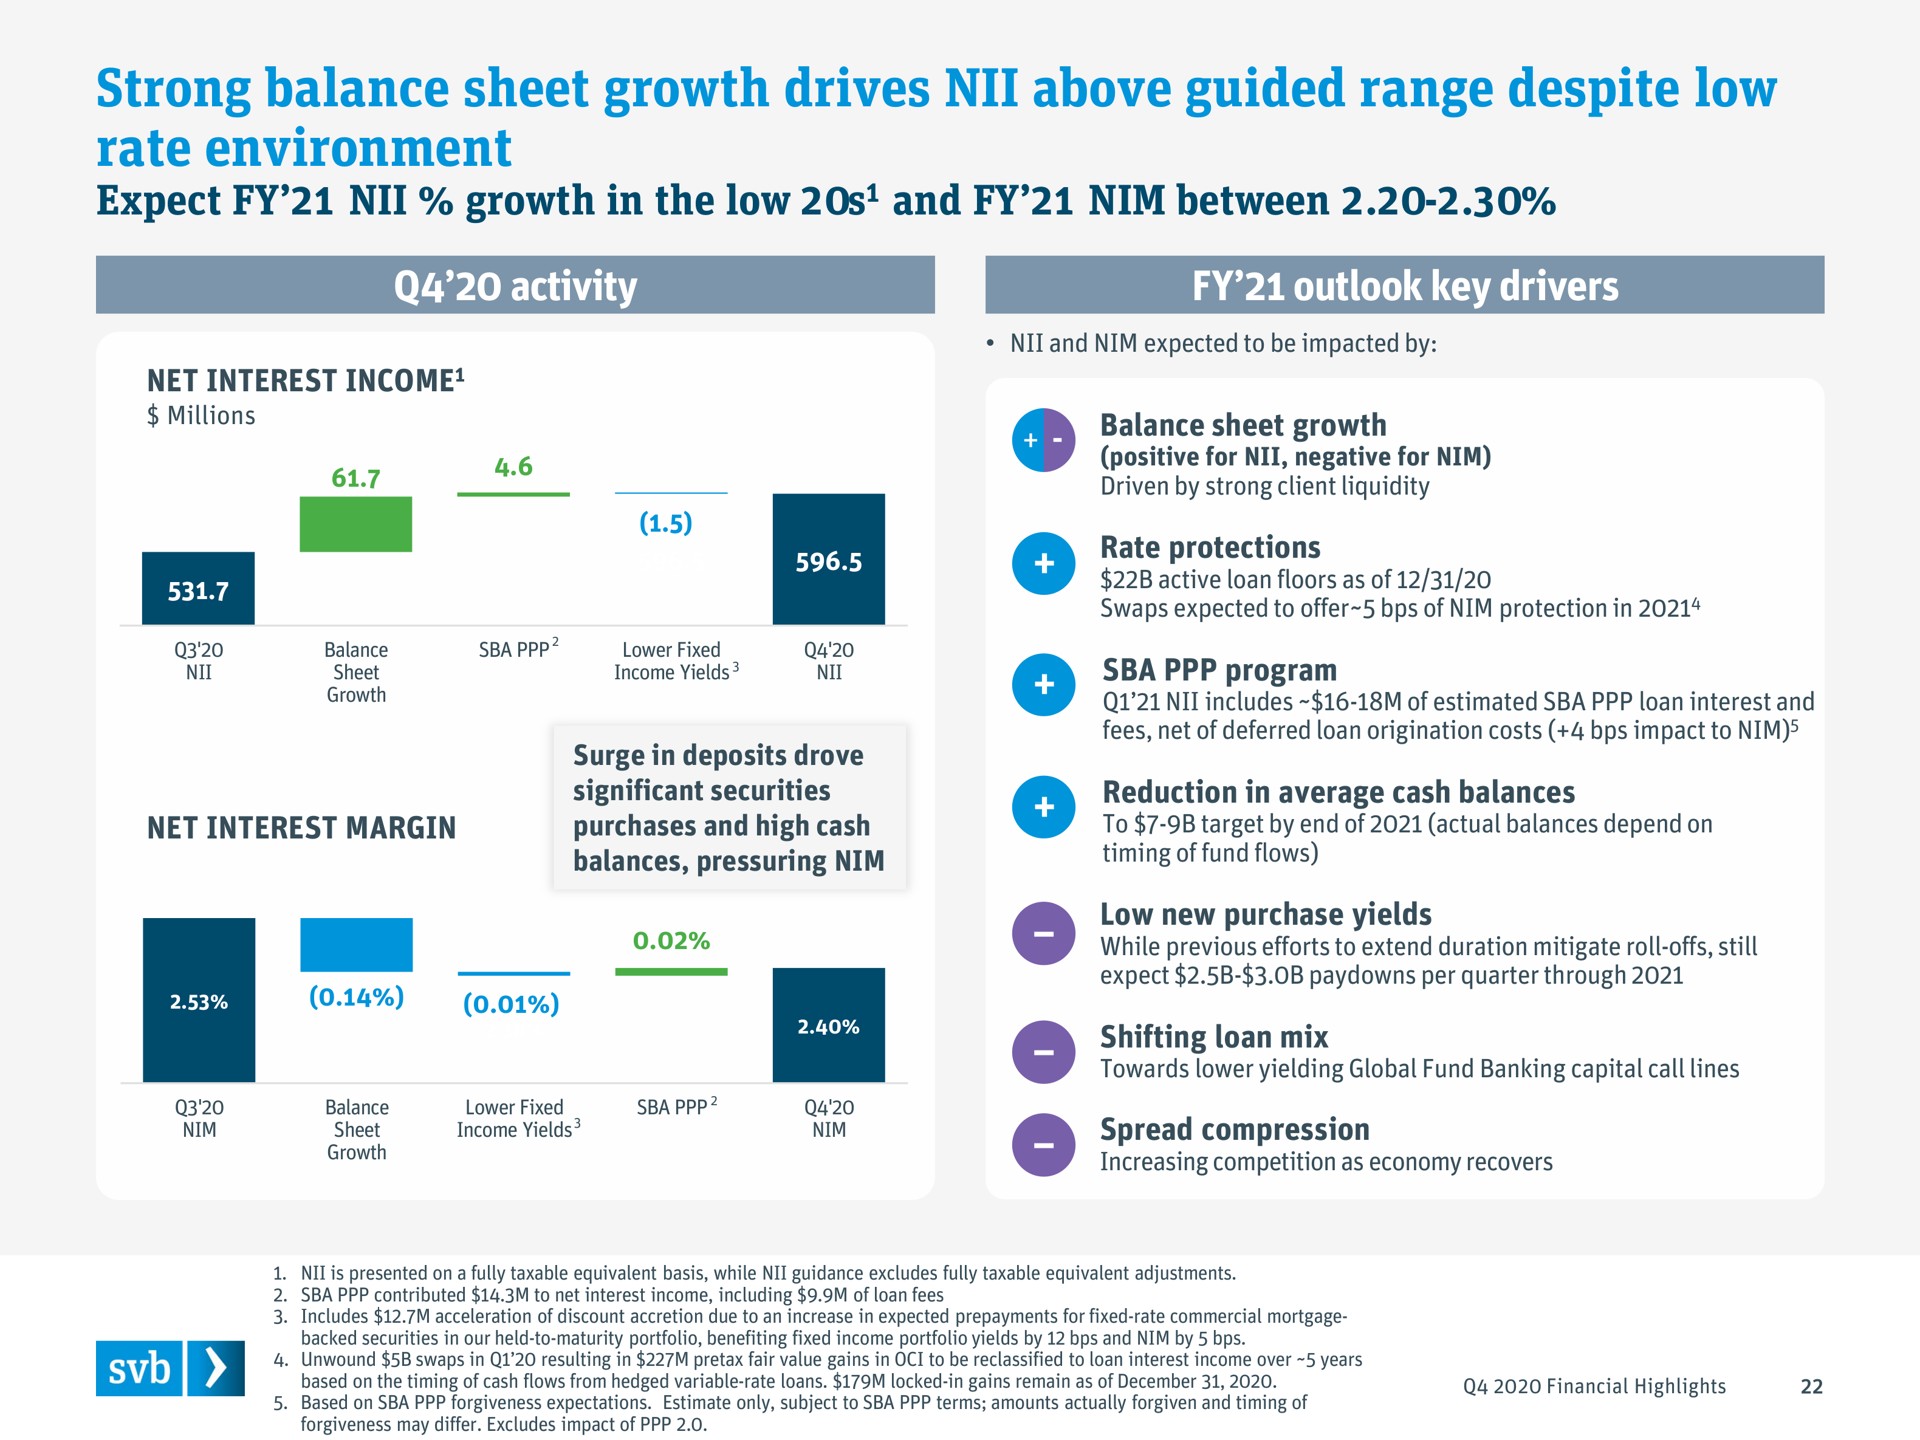 strong balance sheet growth drives above guided range despite low rate environment | Silicon Valley Bank